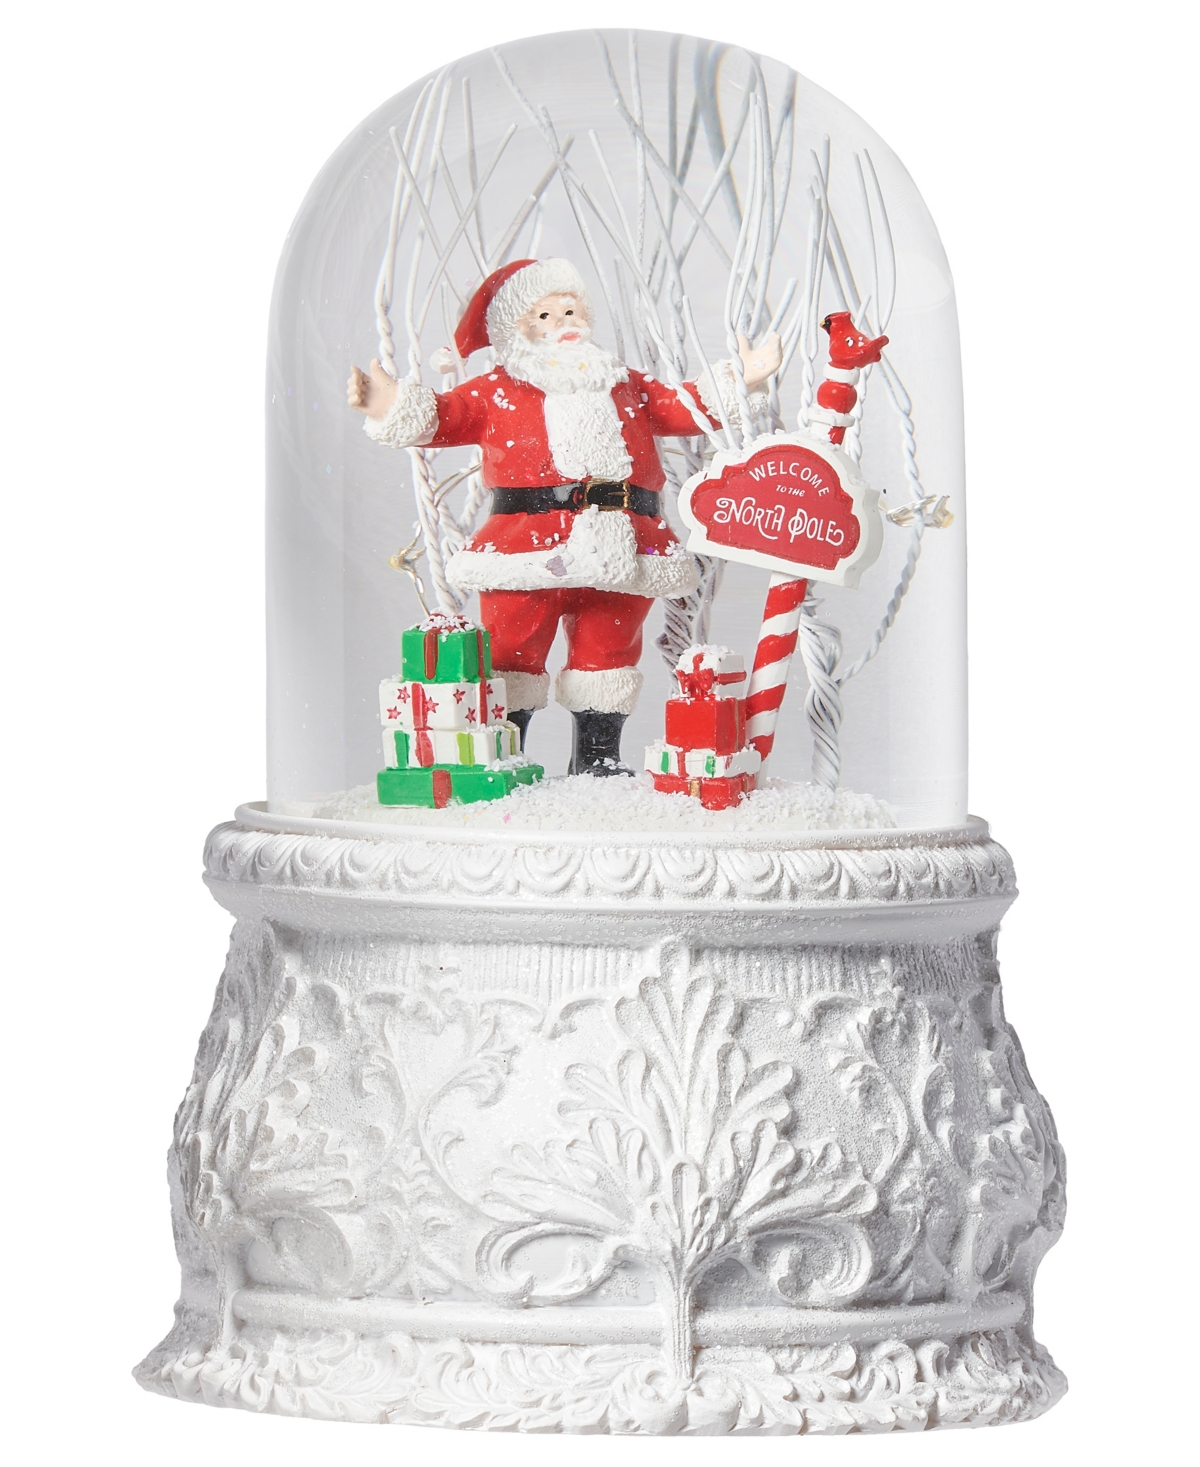 Roman 6.2" H Musical Light Emitting Diode (led) Santa Tall Dome In Multi Color